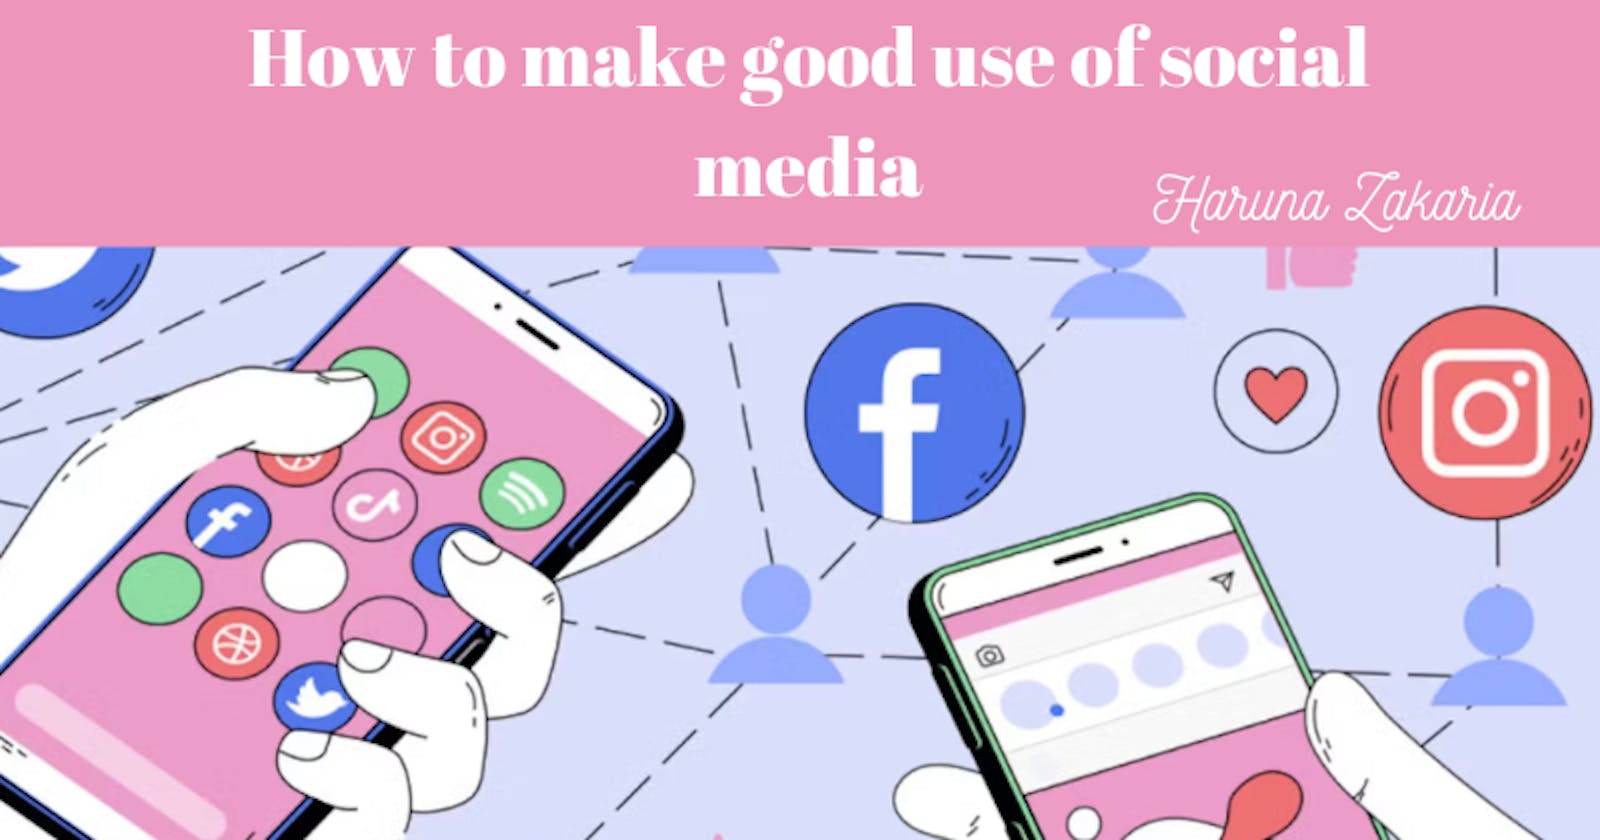 How to make good use of social media